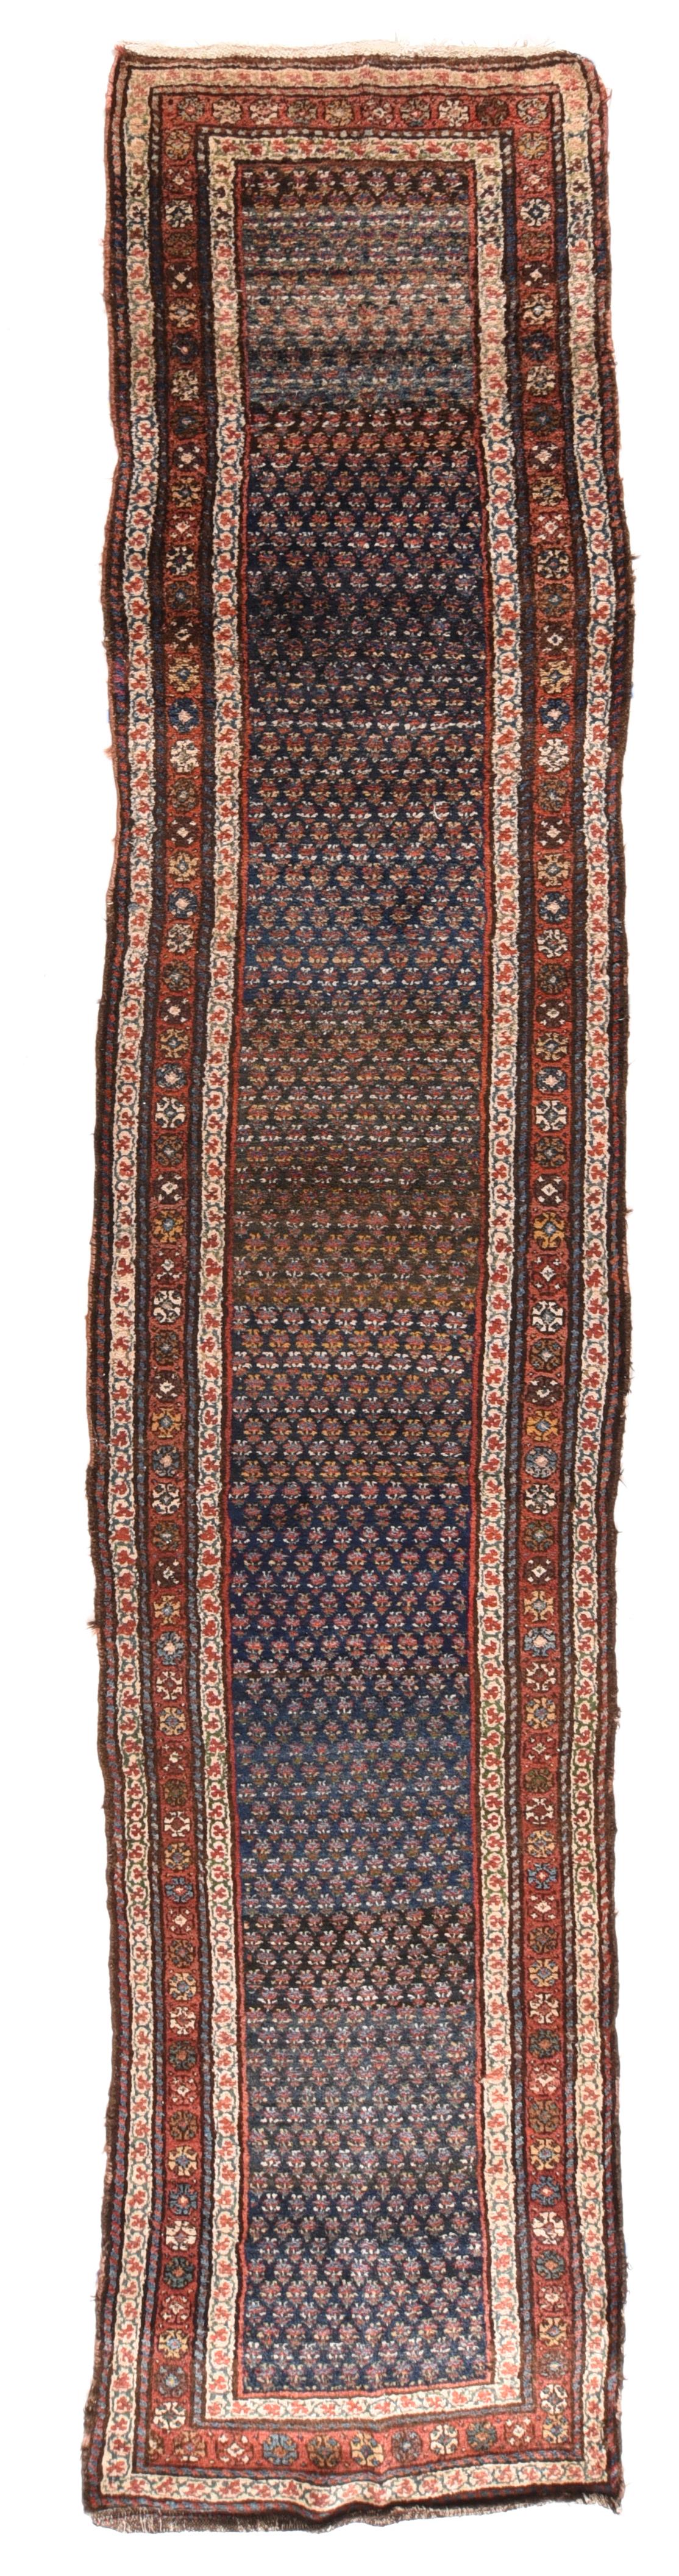 Antique North West Persia Rug In Excellent Condition For Sale In New York, NY